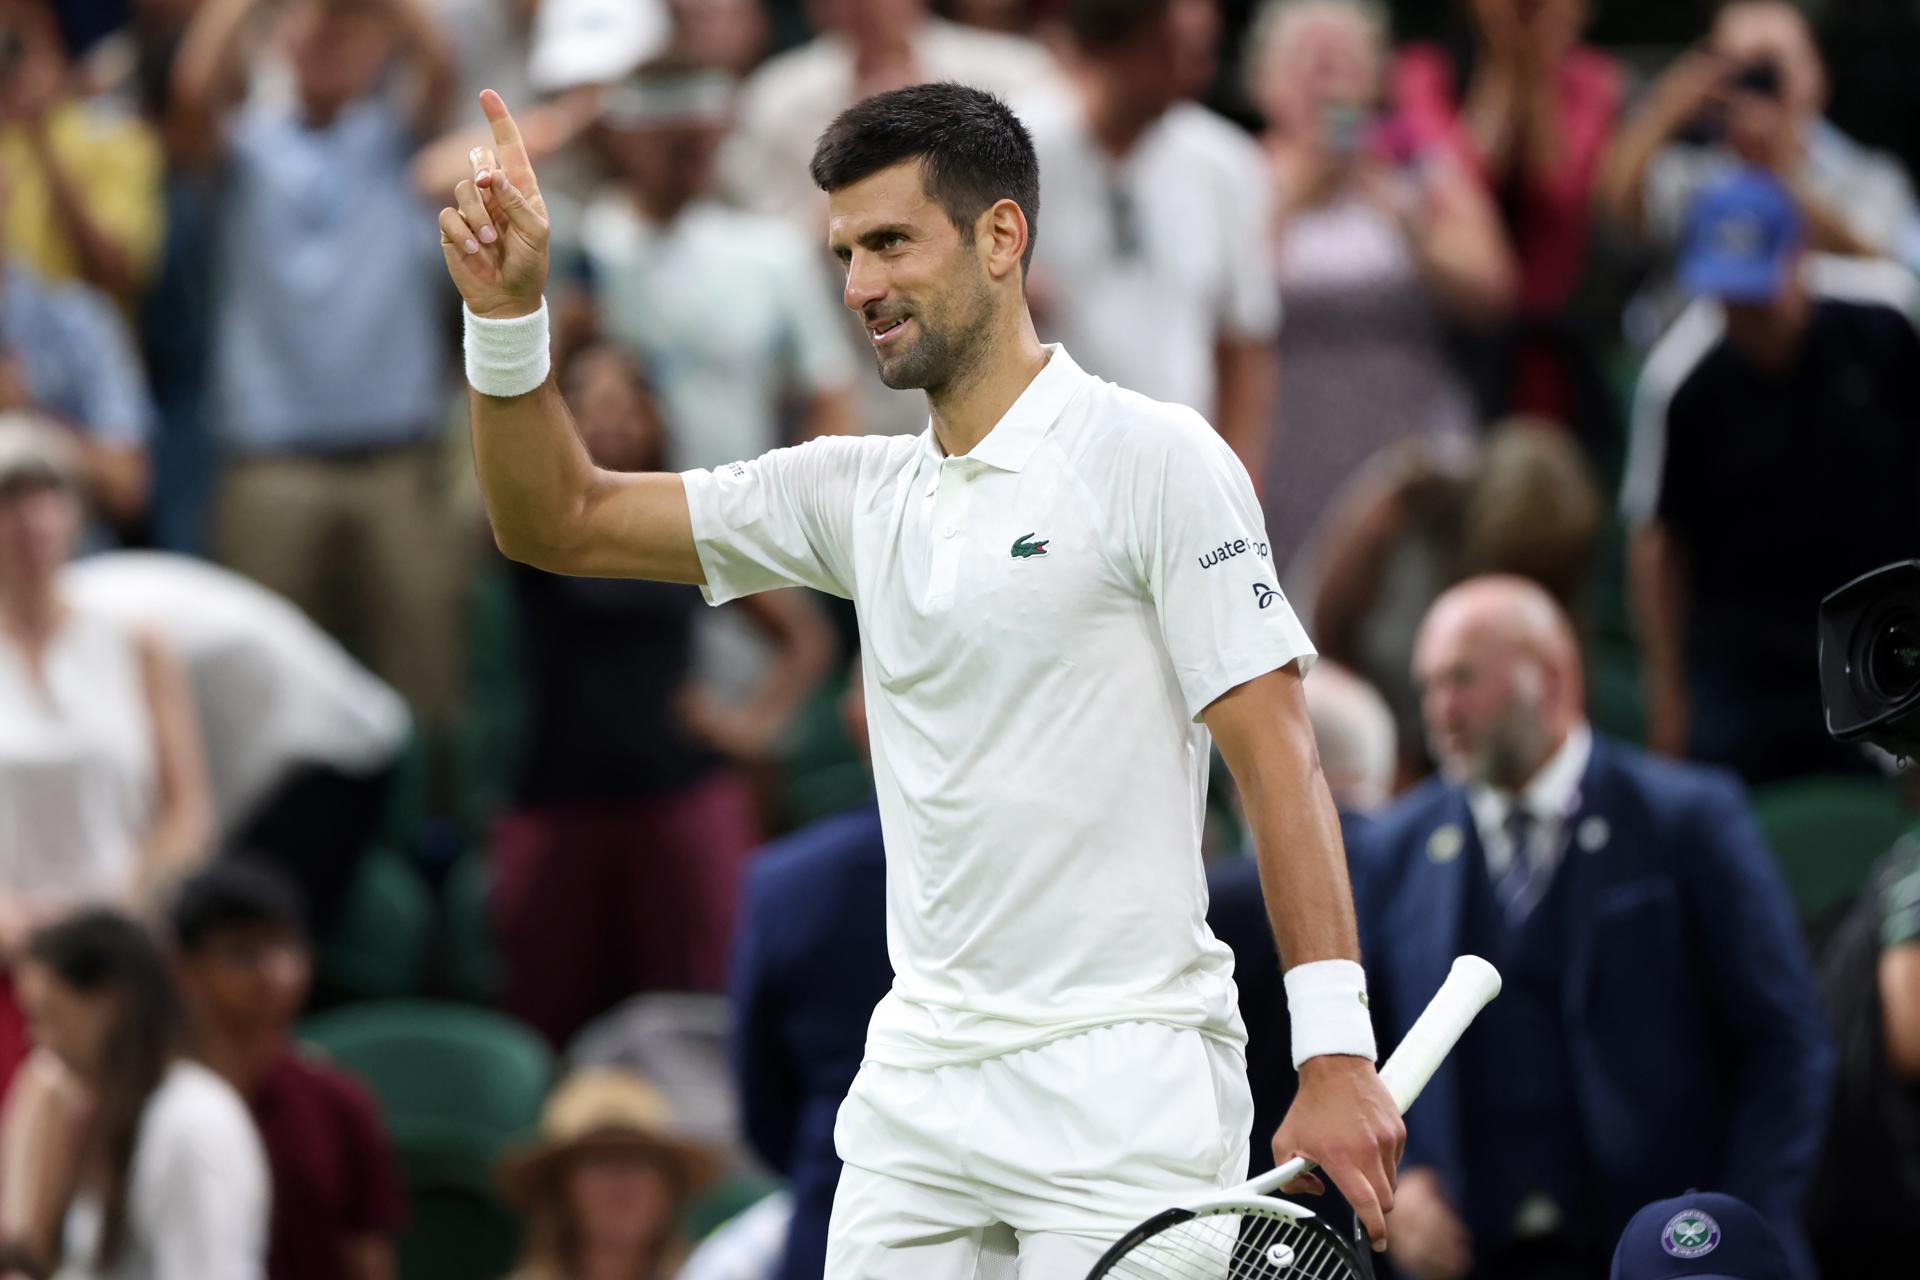 Novak Djokovic of Serbia reacts after defeating Stan Wawrinka of Switzerland in their men's singles match at the Wimbledon Championships, Wimbledon, Britain, 07 July 2023. EFE/EPA/NEIL HALL EDITORIAL USE ONLY